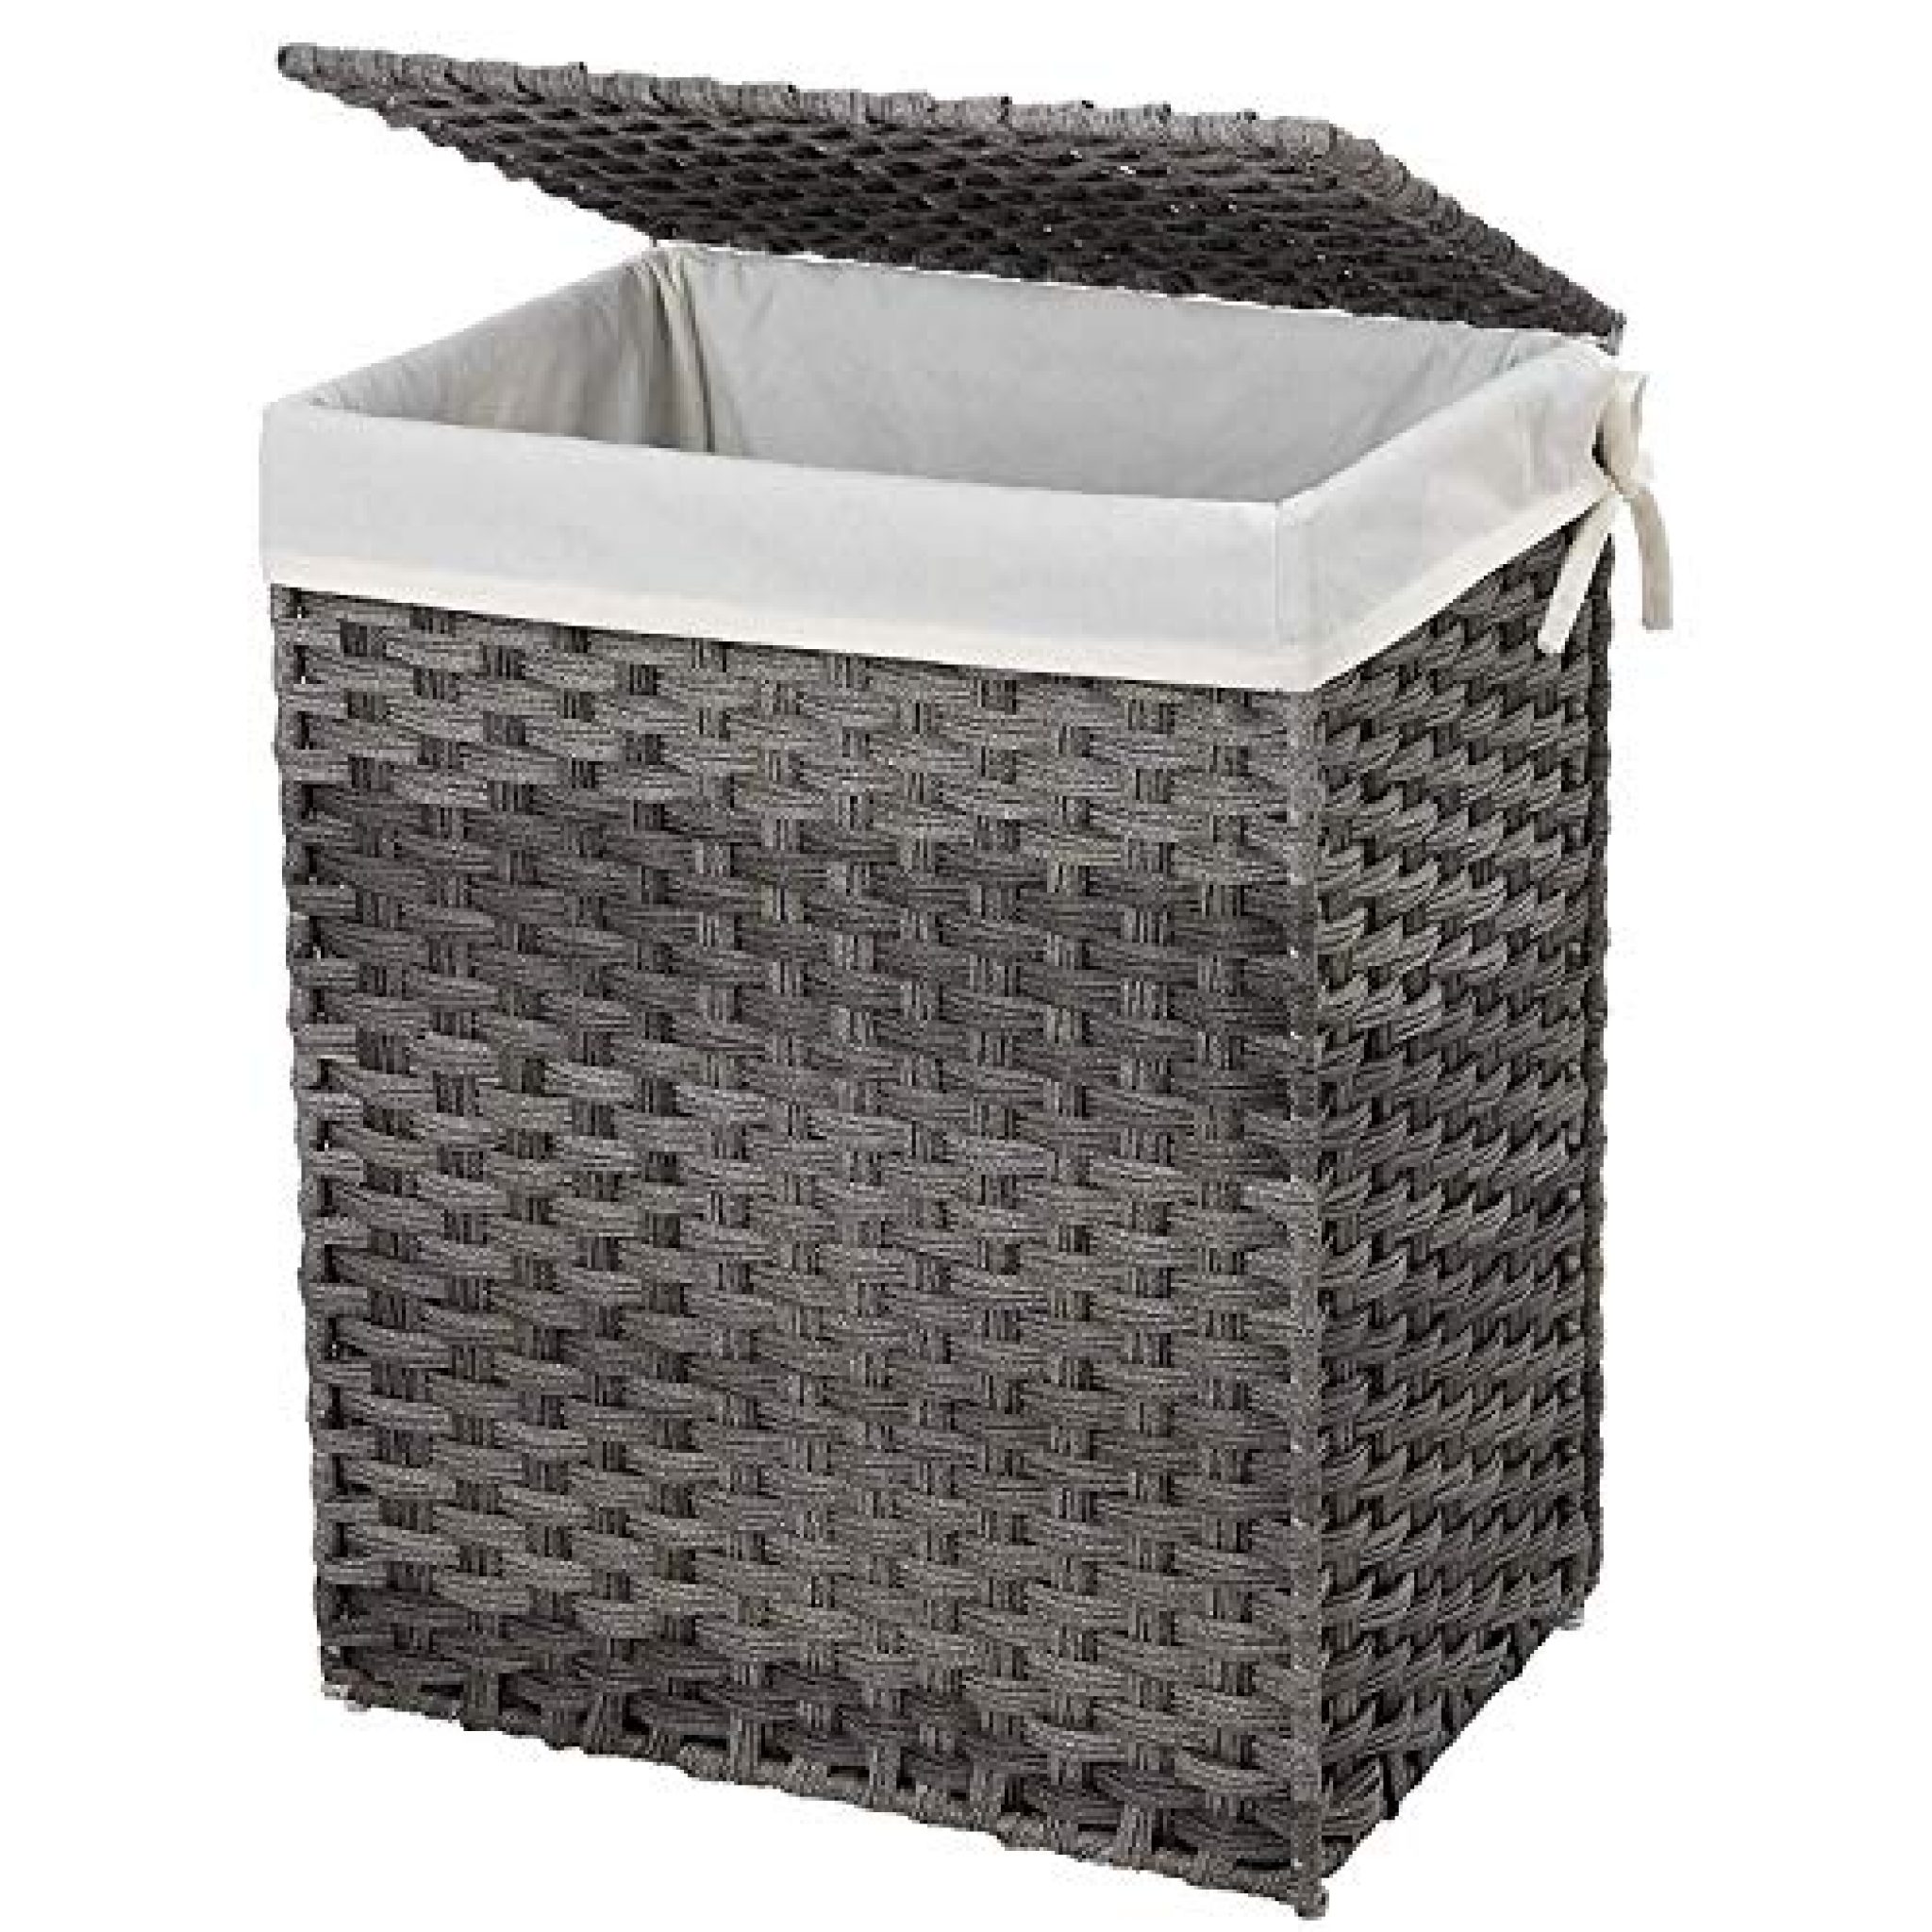 SONGMICS Handwoven Laundry Basket, 90L — Deals from SaveaLoonie!